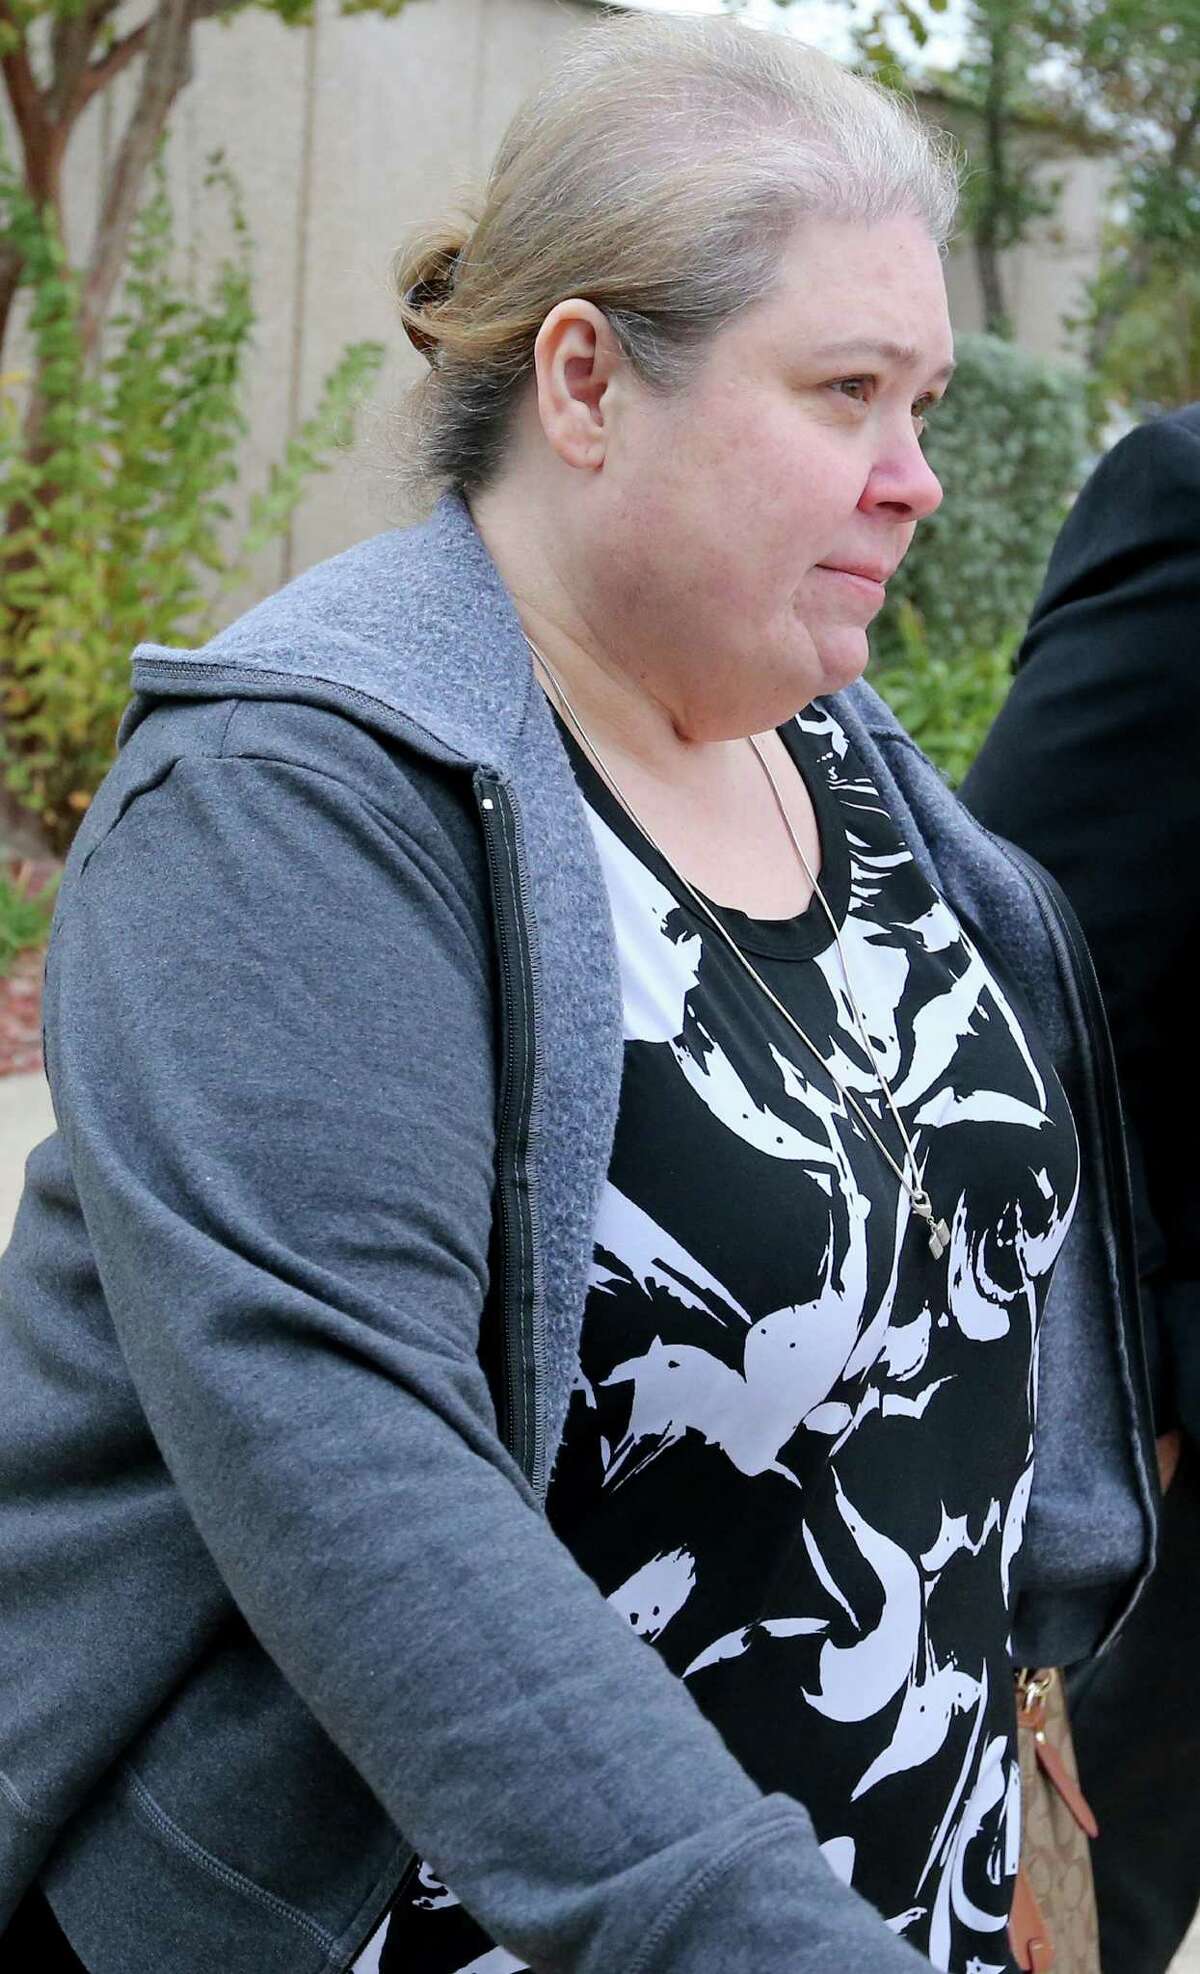 Former FourWinds Logistics Comptroller Laura Jacobs arrives Thursday at the the John Wood Federal Courthouse, where she pleaded guilty to a felony charge of conspiracy to commit wire fraud. She is the third ex-company official to plead guilty in a scheme to defraud investors.